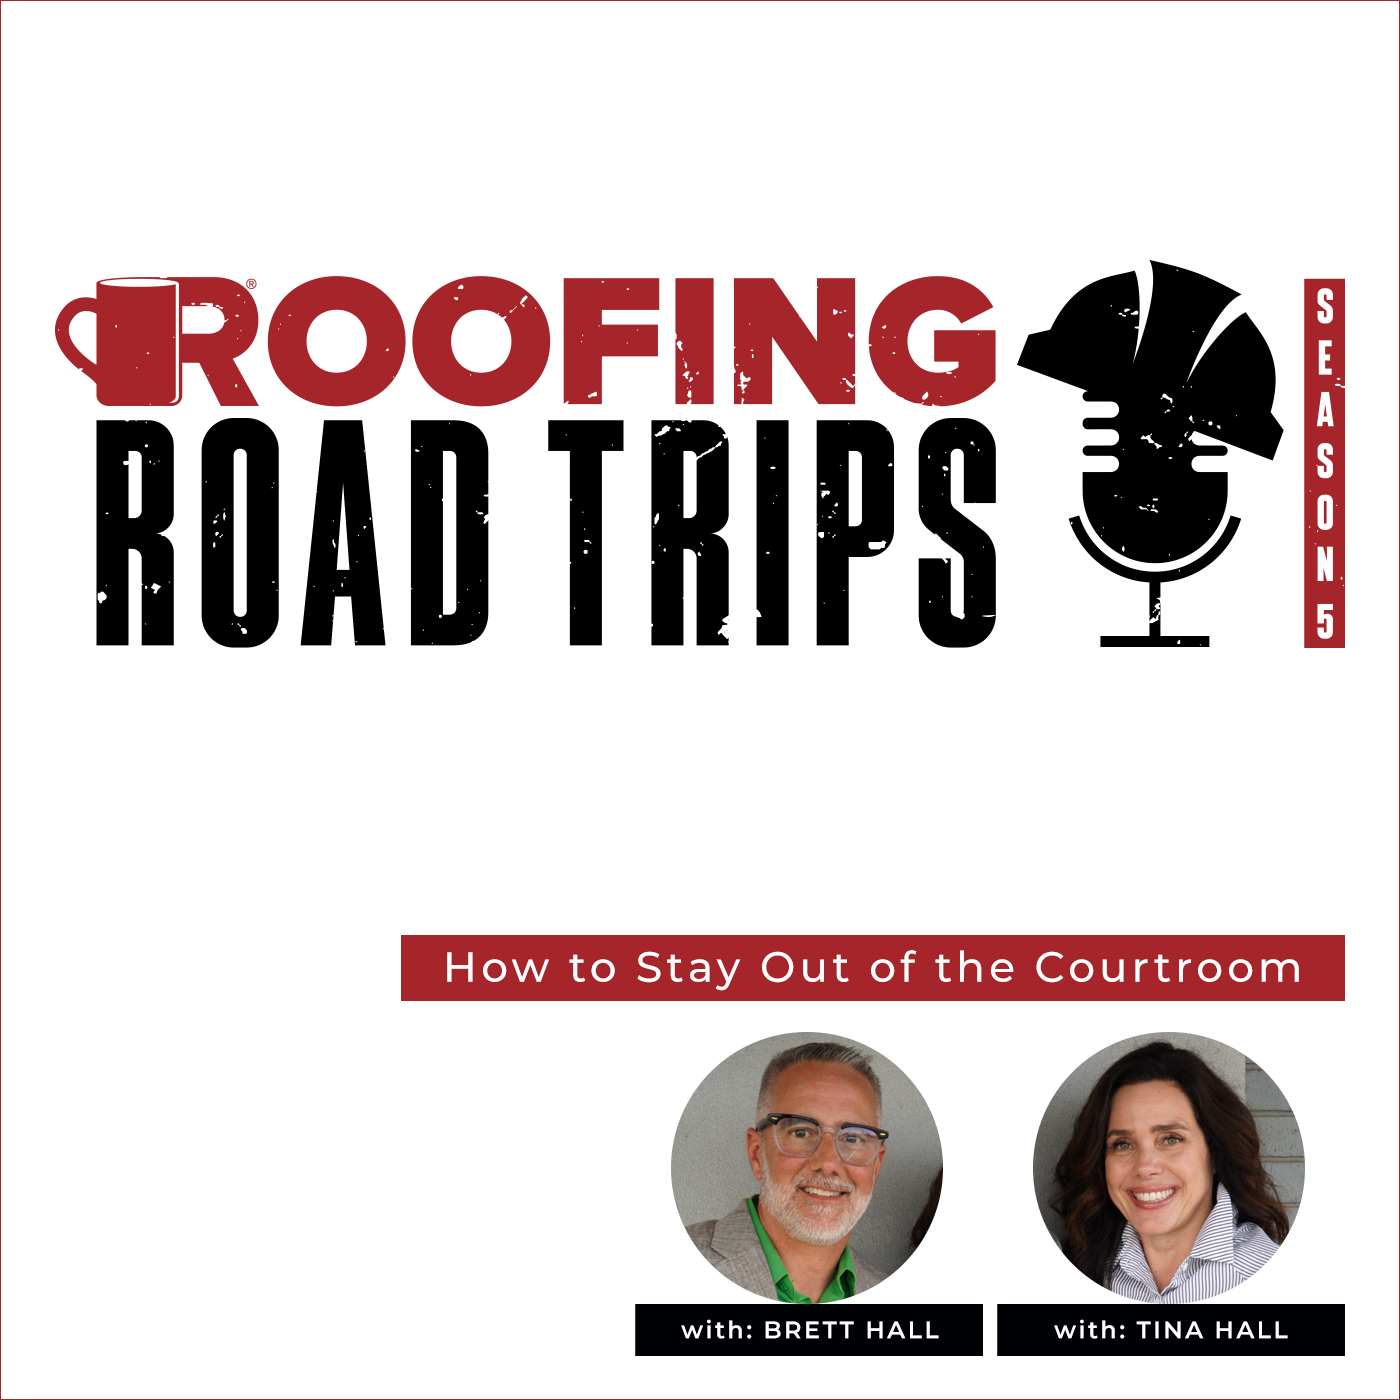 DaVinci Roofscapes - Brett and Tina Hall - How to Stay Out of The Courtroom